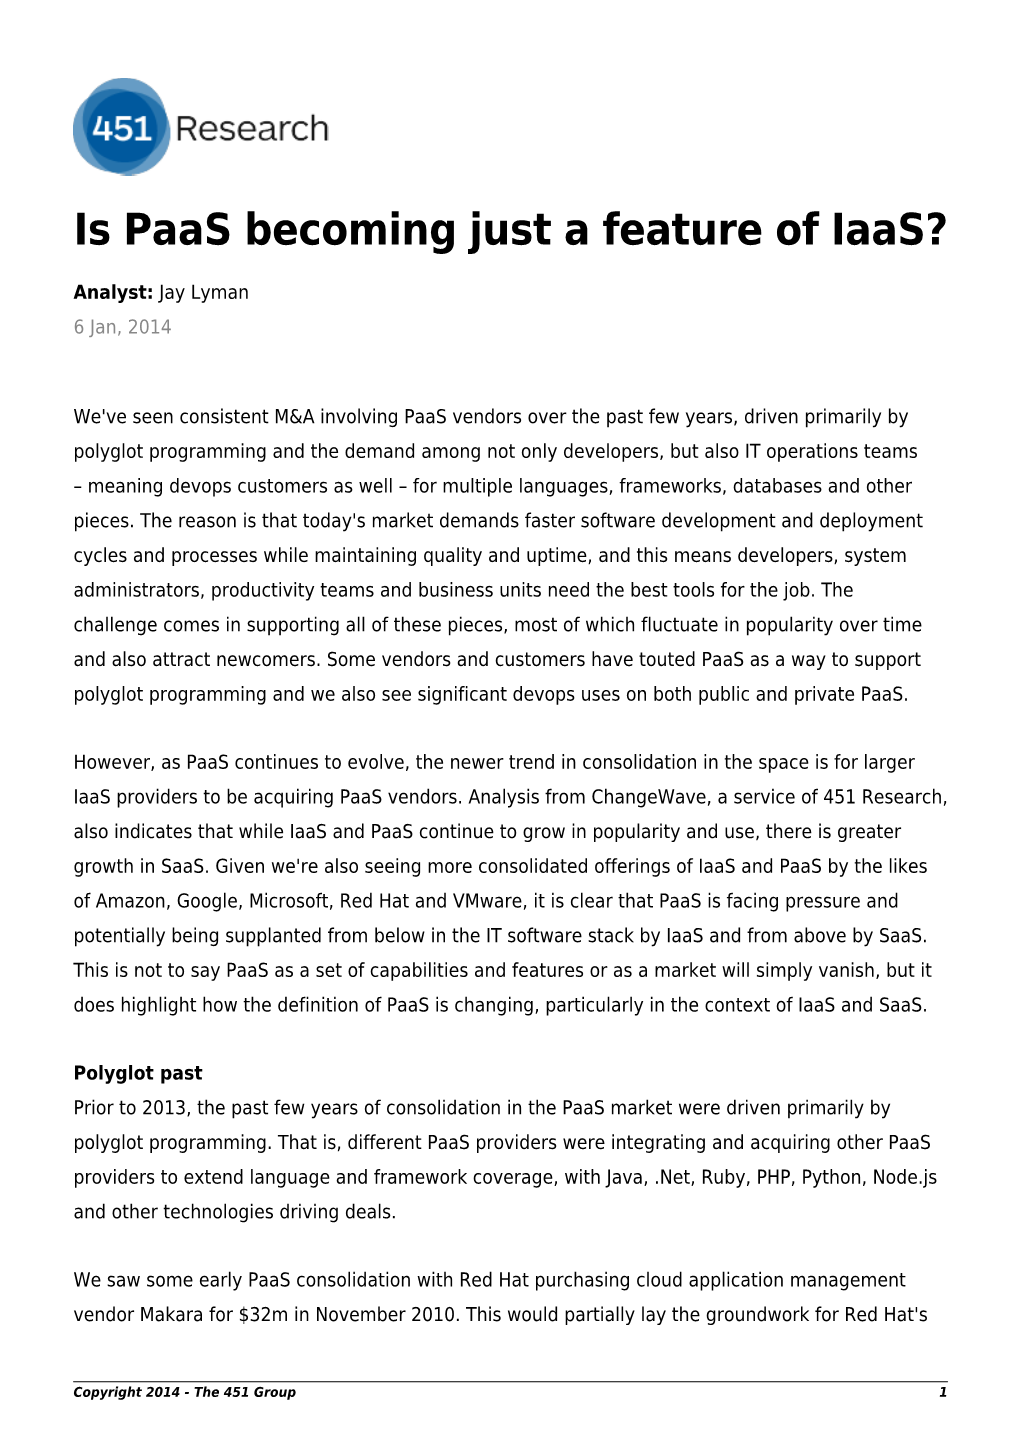 Is Paas Becoming Just a Feature of Iaas?